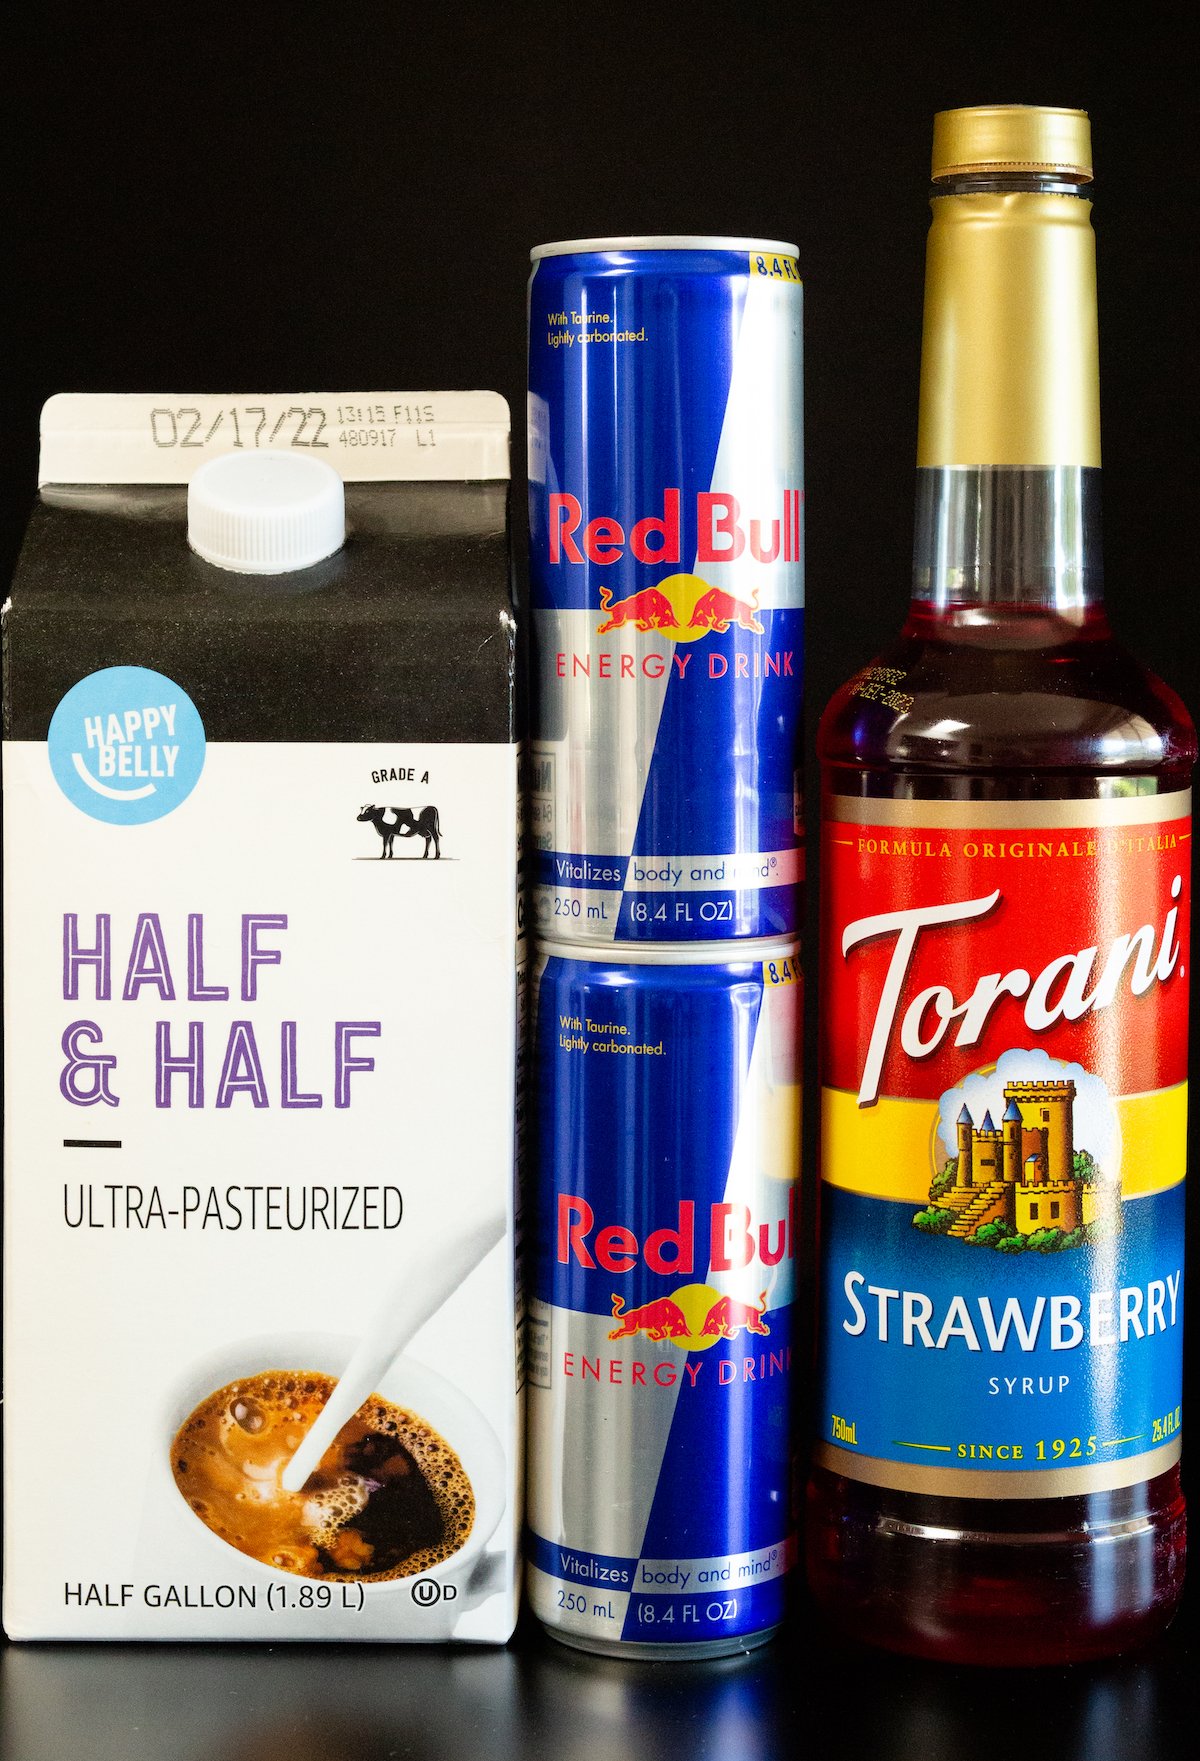 A carton of half and half, two cans of red bull, and a strawberry syrup bottle on a black background.